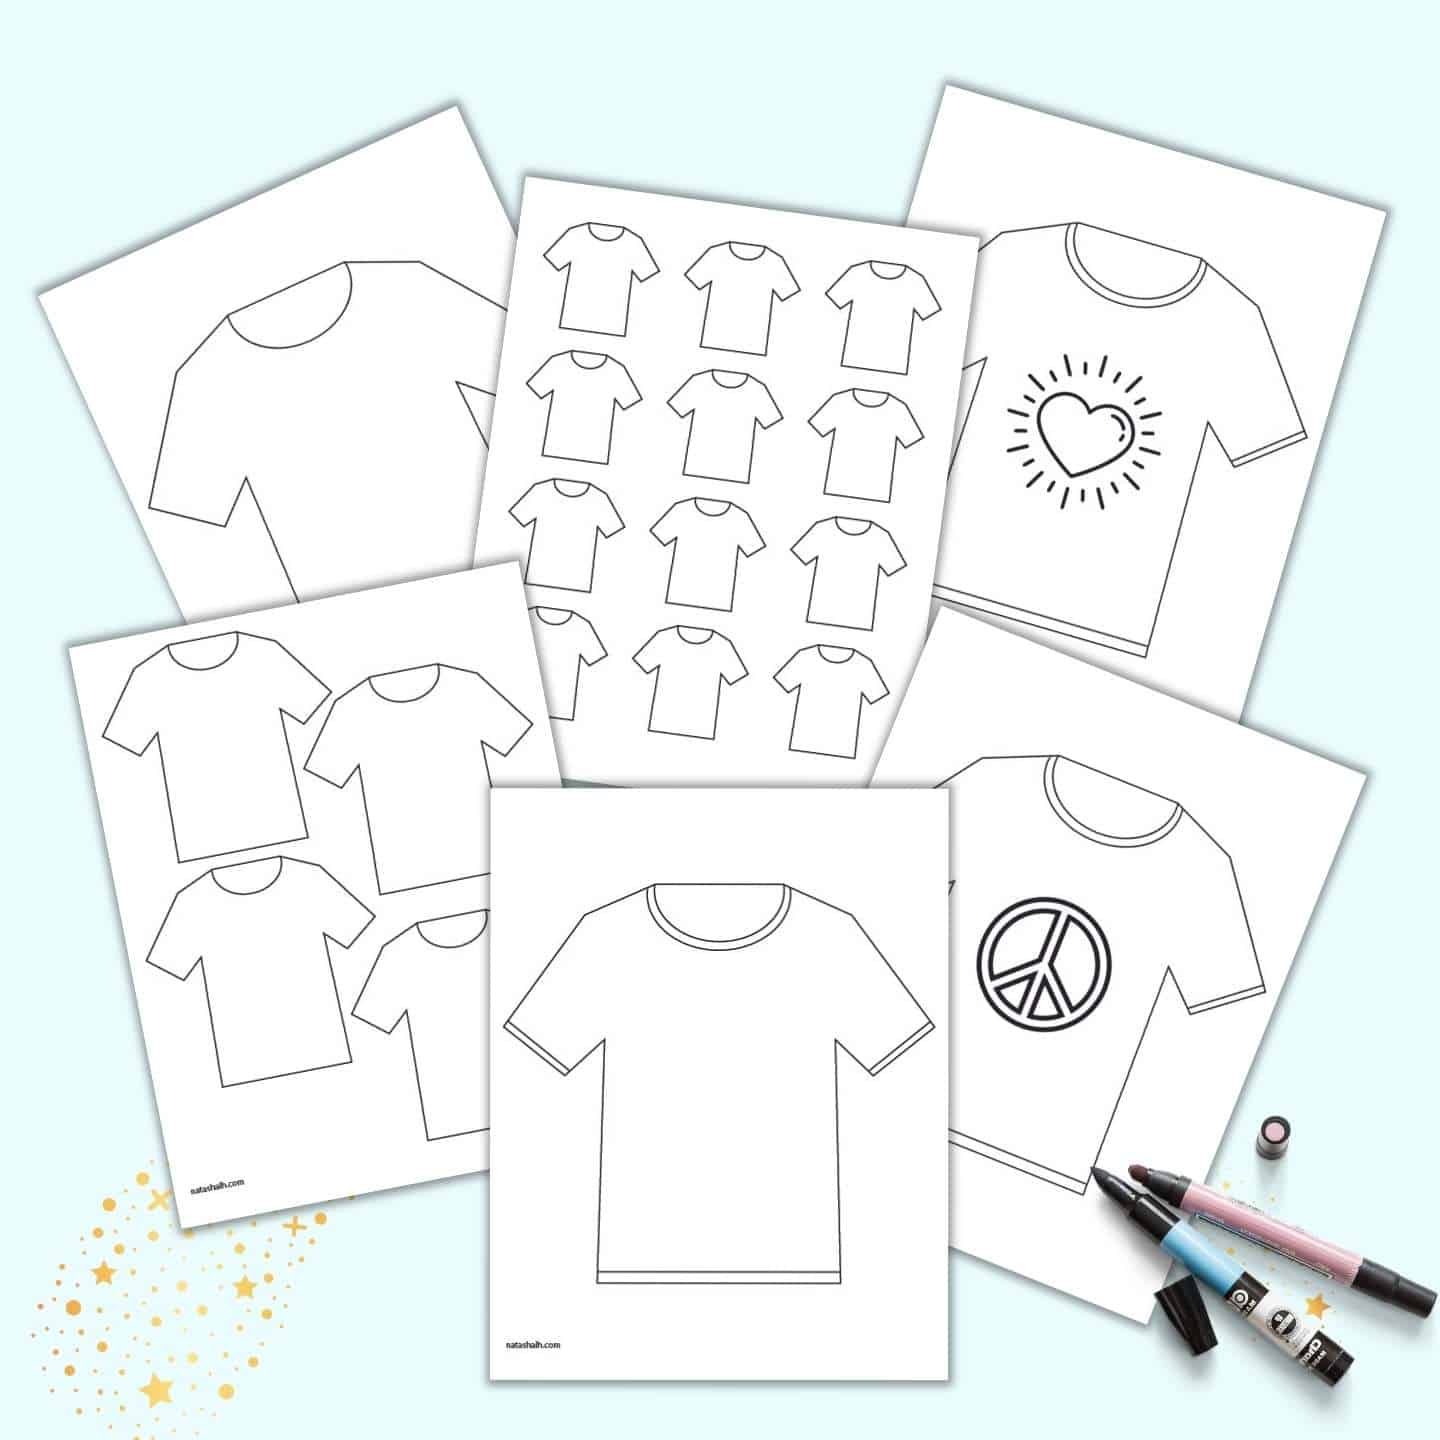 Technical sketch white t shirt tshirt design template front and back  vector illustration  CanStock